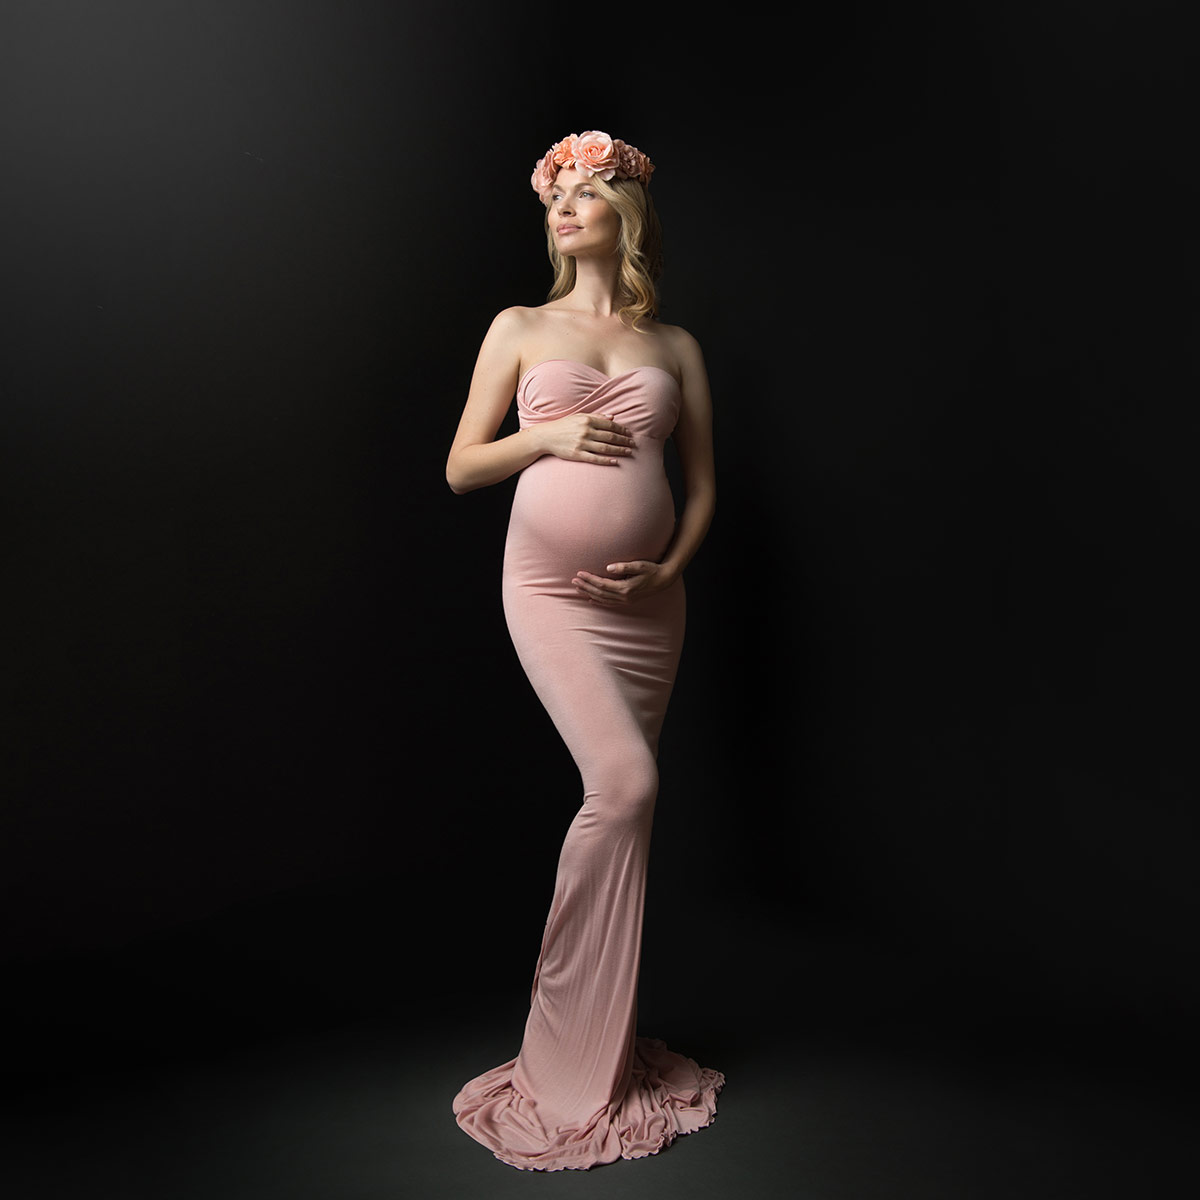 Pink dress worn by a pregnant woman with a headband